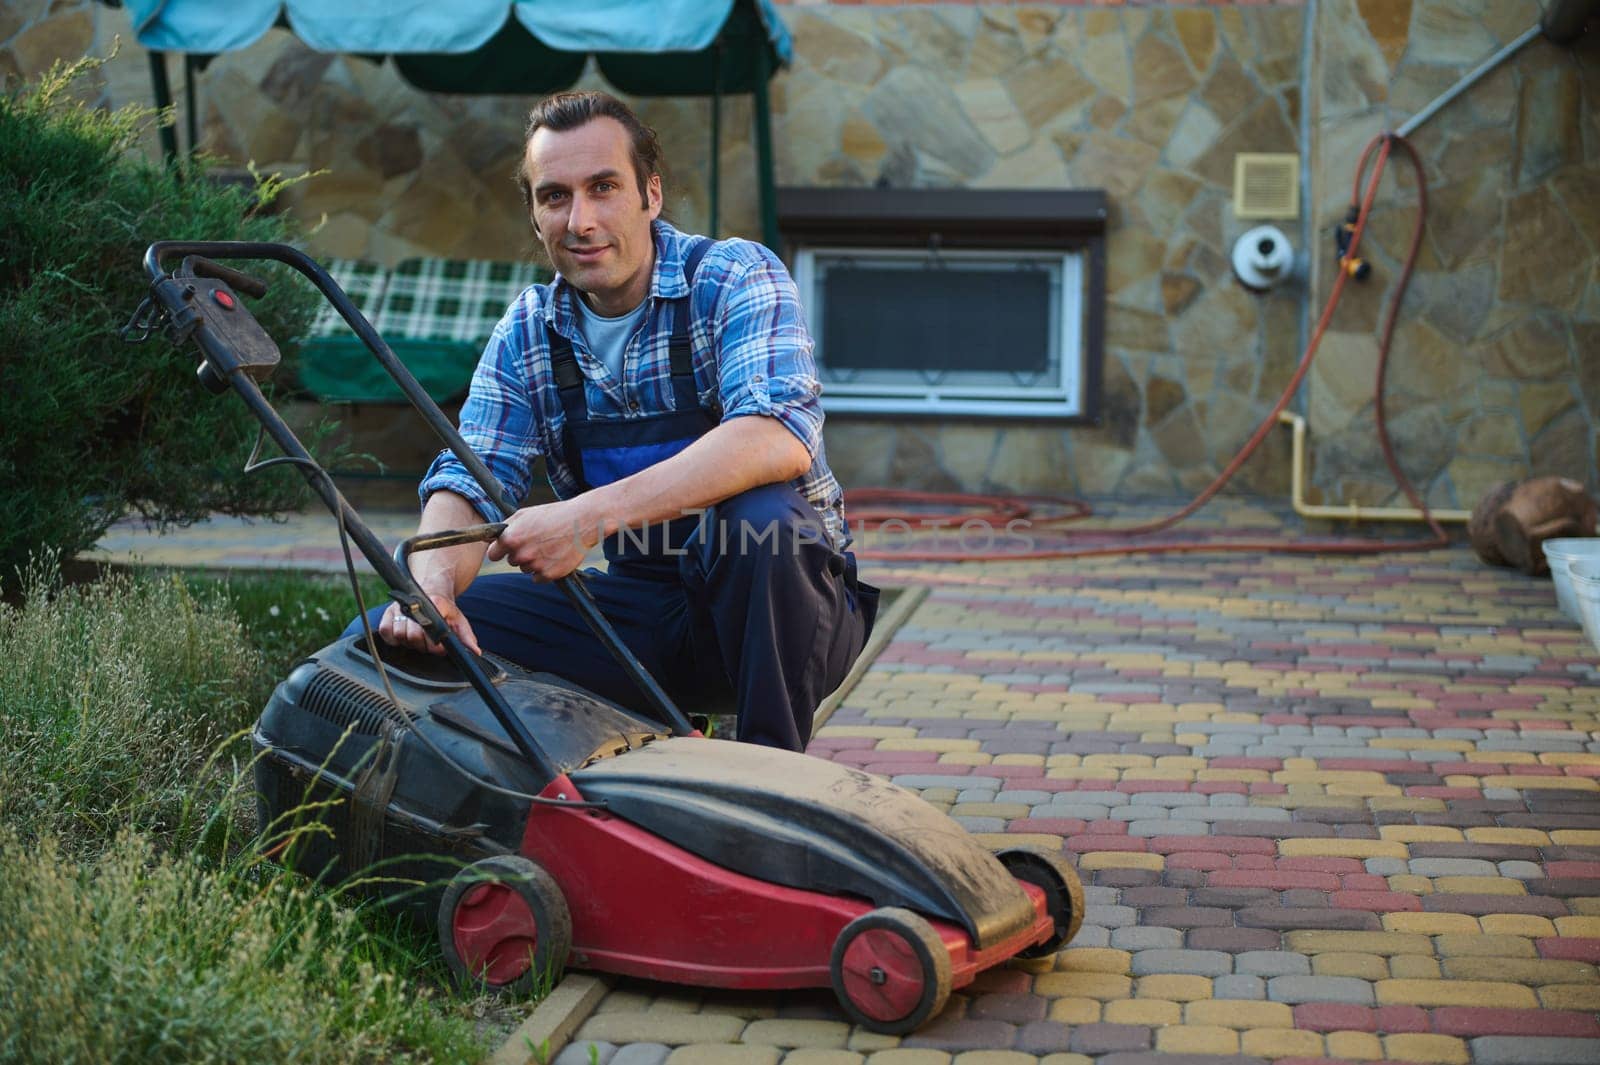 Portrait of an attractive Caucasian man, worker gardener, professional landscaper 40 years old, smiling looking at camera while replacing a filter on the electric lawn mower in the garden backyard.